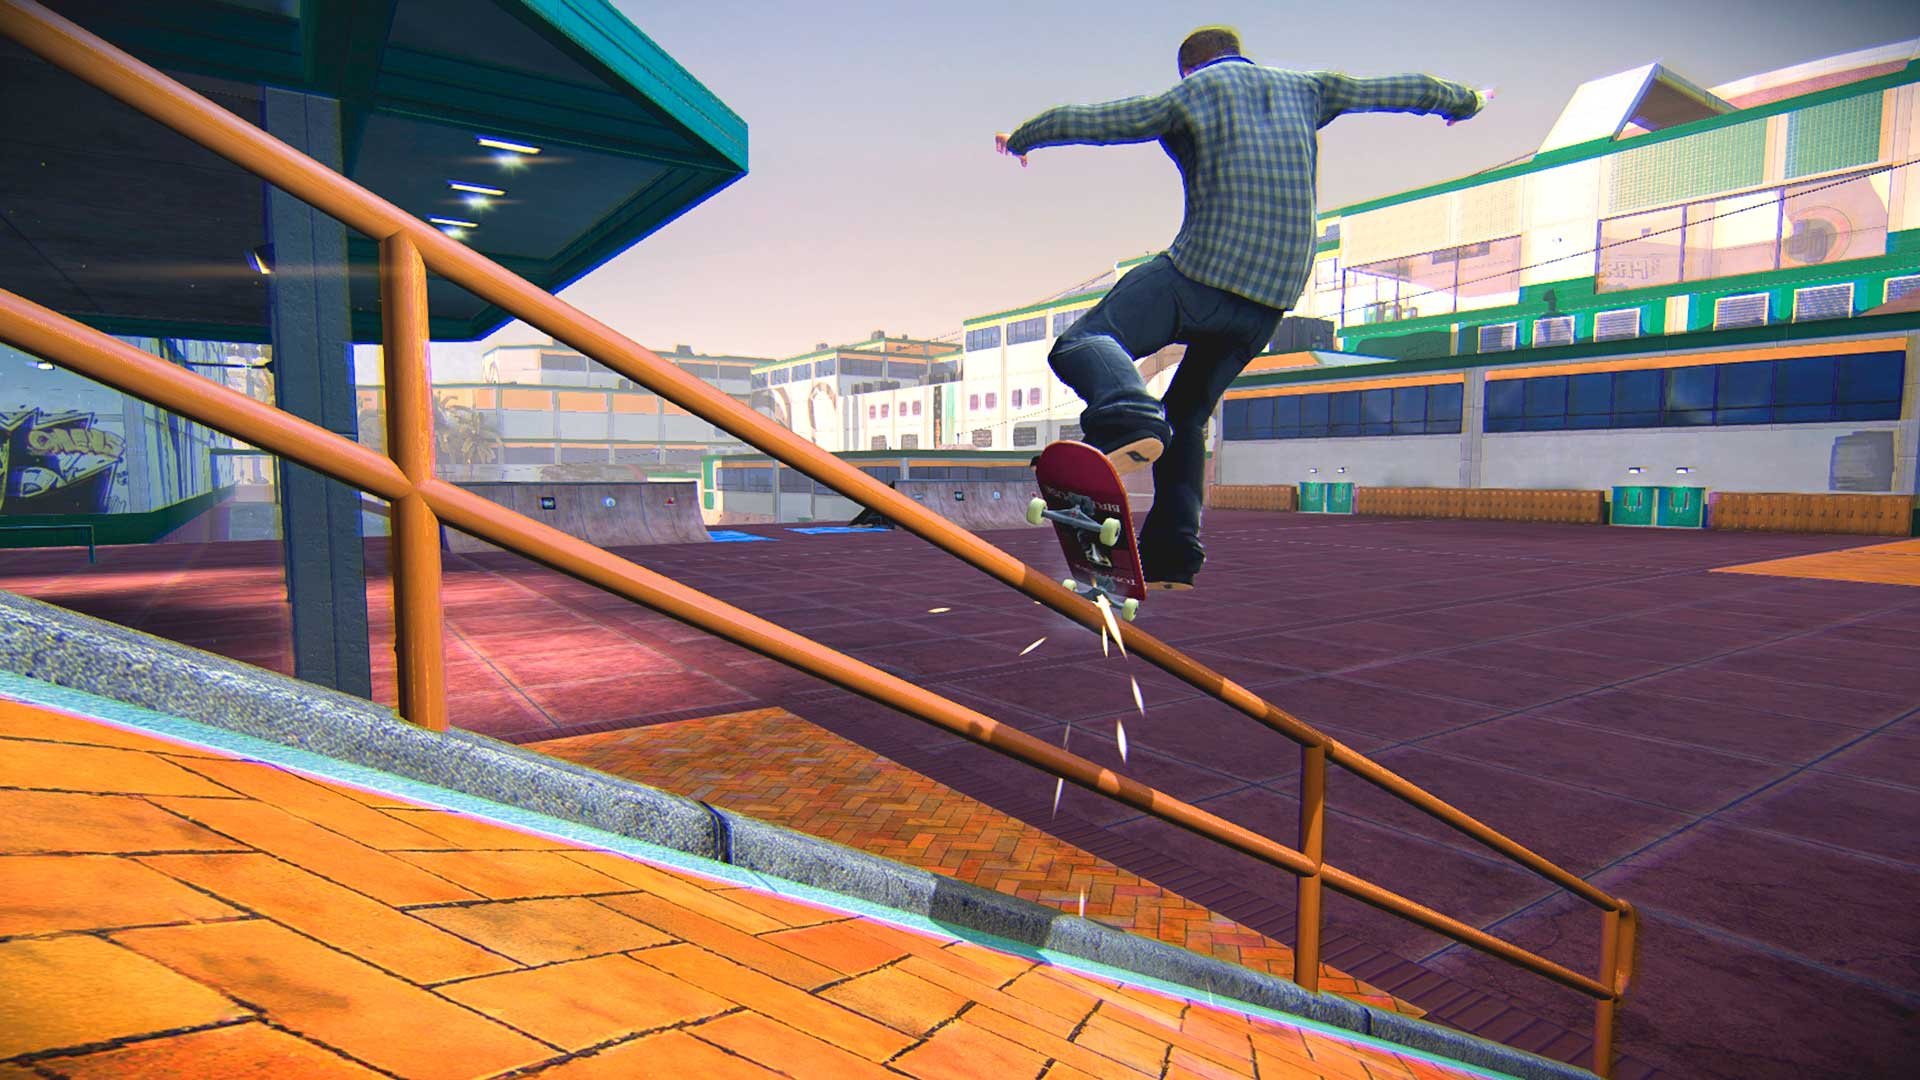 tony-hawk-s-pro-skater-5-will-let-you-create-and-share-your-own-parks